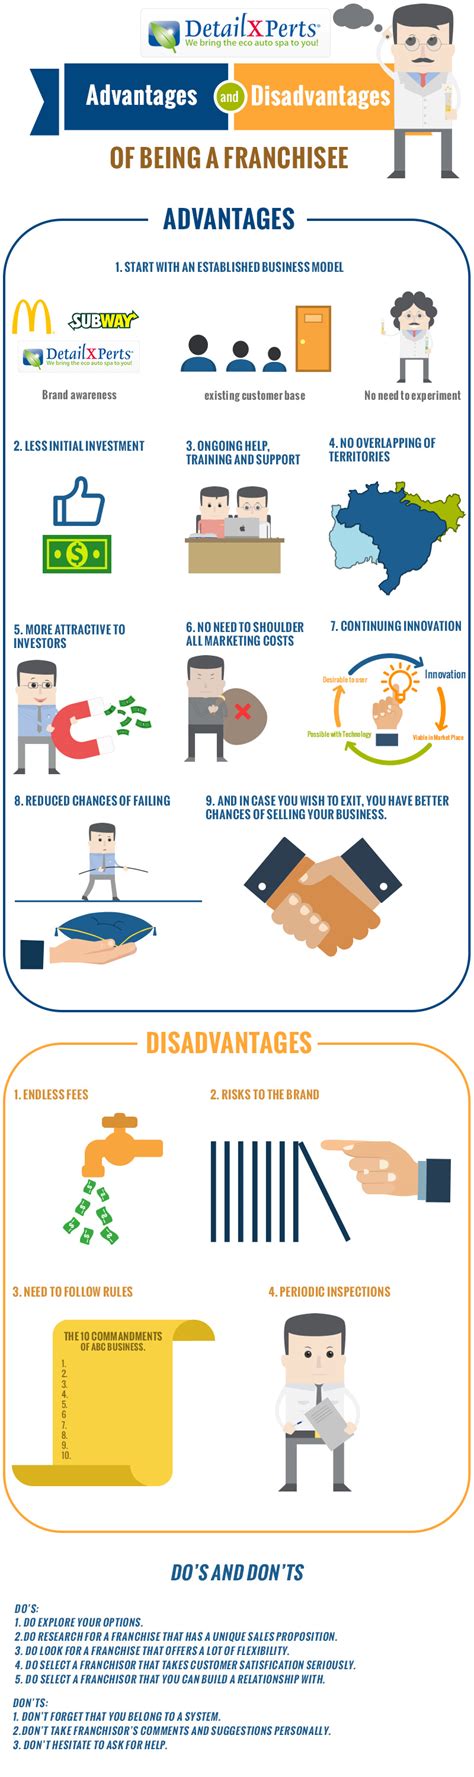 Advantages And Disadvantages Of Being A Franchisee Infographic